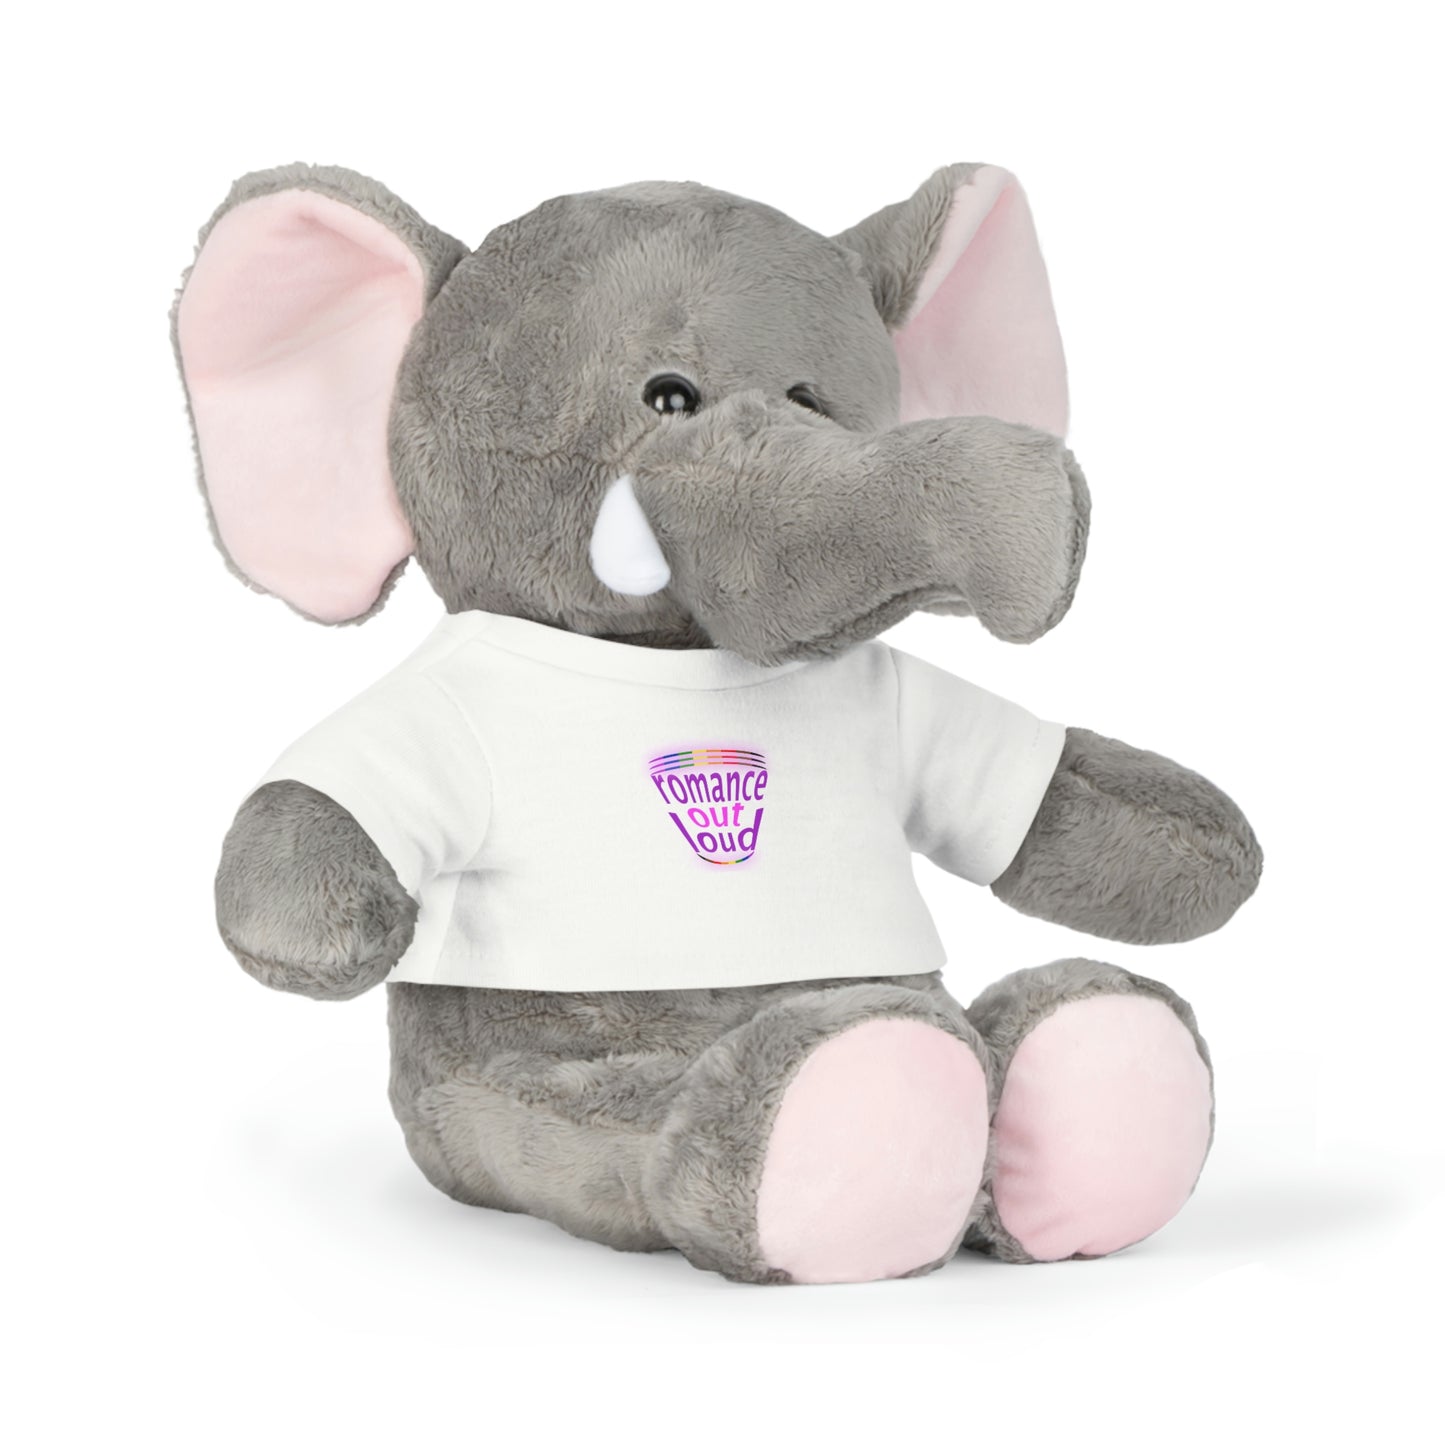 Plush Toy with T-Shirt (White)